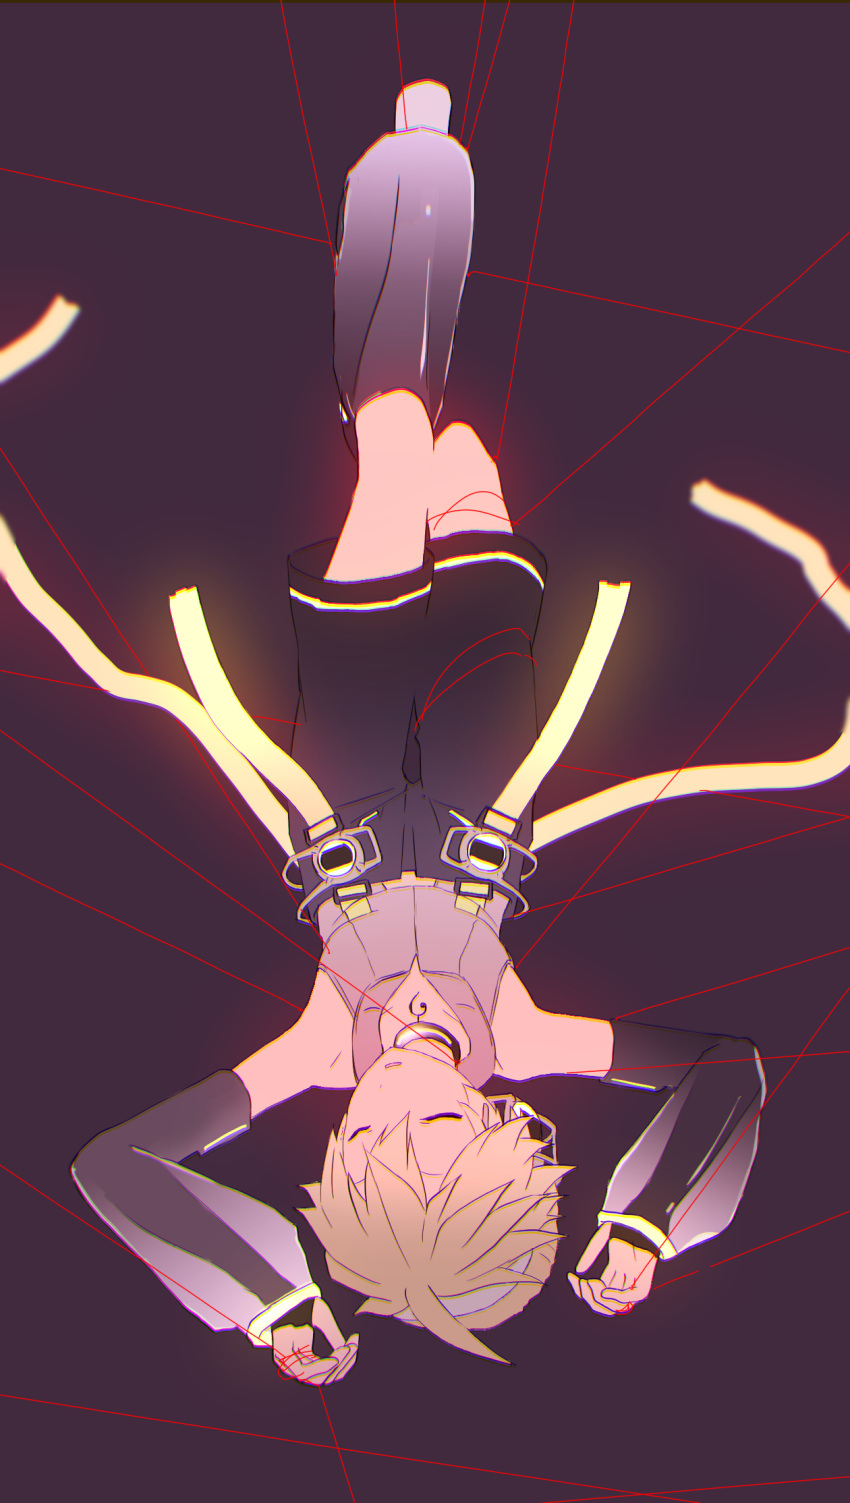 1boy bare_shoulders bass_clef belt black_background black_shorts blonde_hair closed_eyes d_futagosaikyou detached_sleeves full_body grey_shirt hanging headphones highres hip_gear kagamine_len kagamine_len_(append) leg_warmers male_focus parted_lips pendant_choker see-through shirt shorts sleeveless sleeveless_shirt solo spiky_hair string string_of_fate upside-down vocaloid vocaloid_append